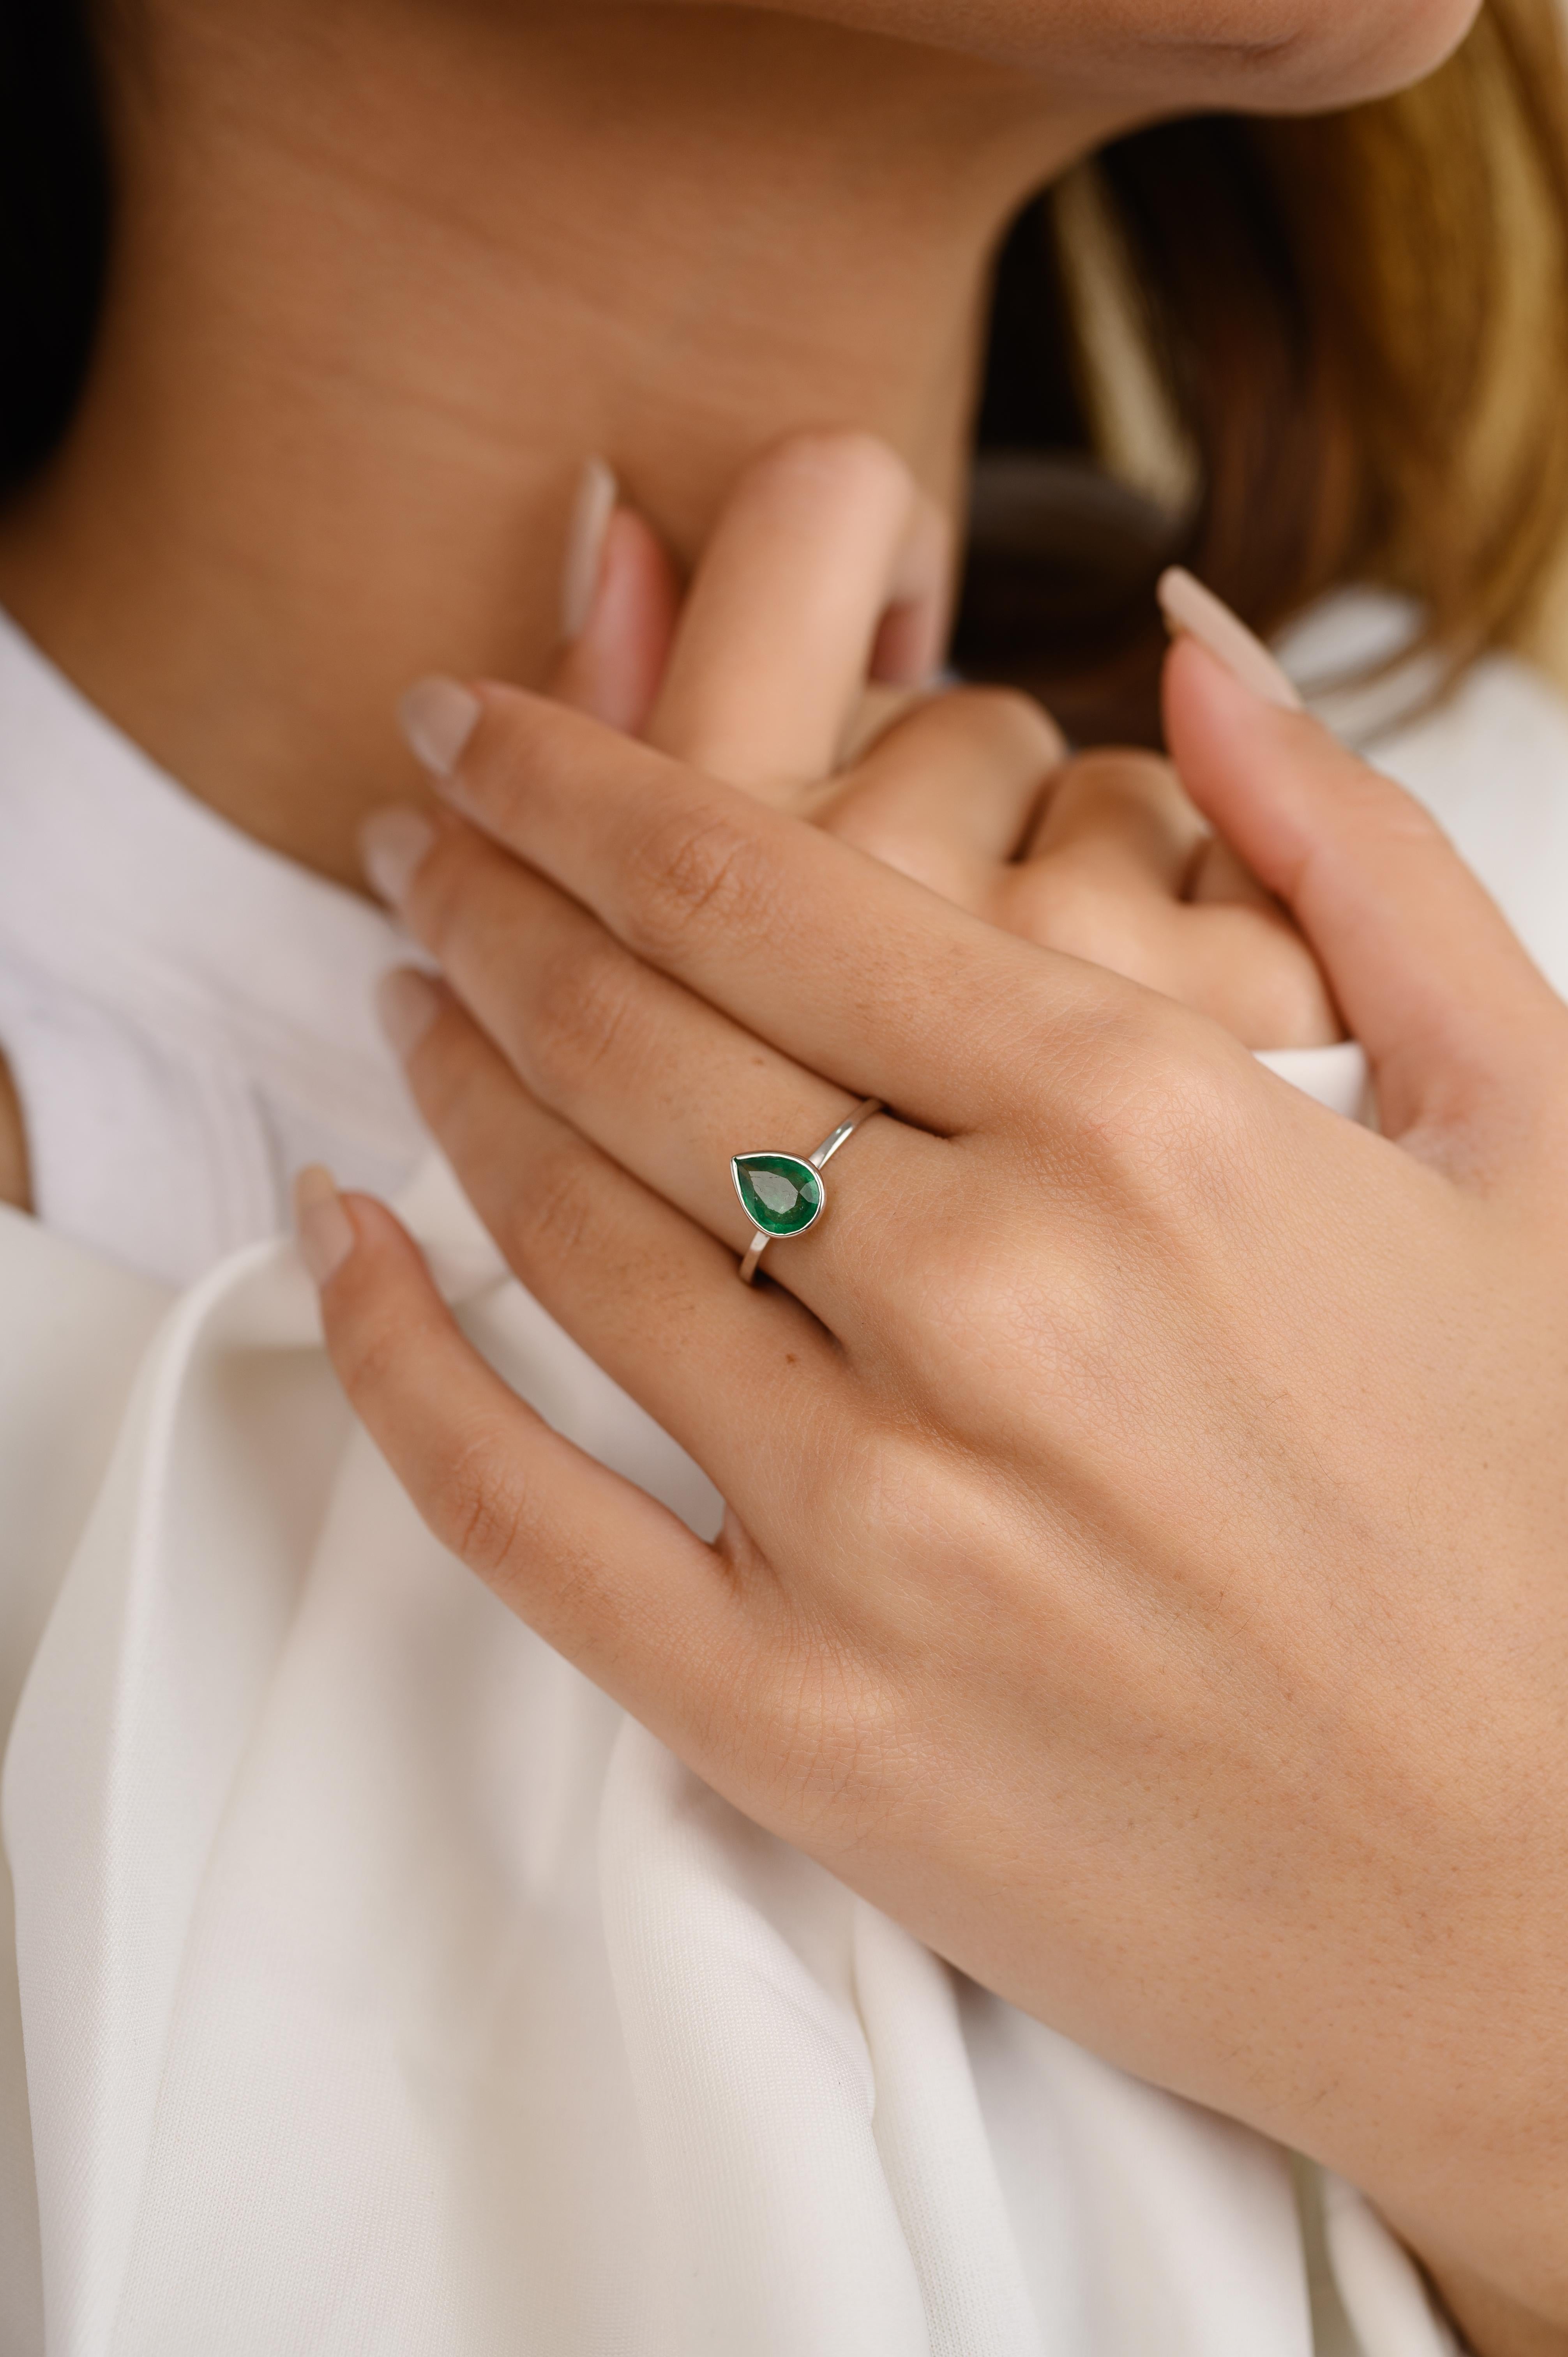 For Sale:  Natural Pear Cut Emerald Birthstone Ring Bezel Set in 18k White Gold Settings 4